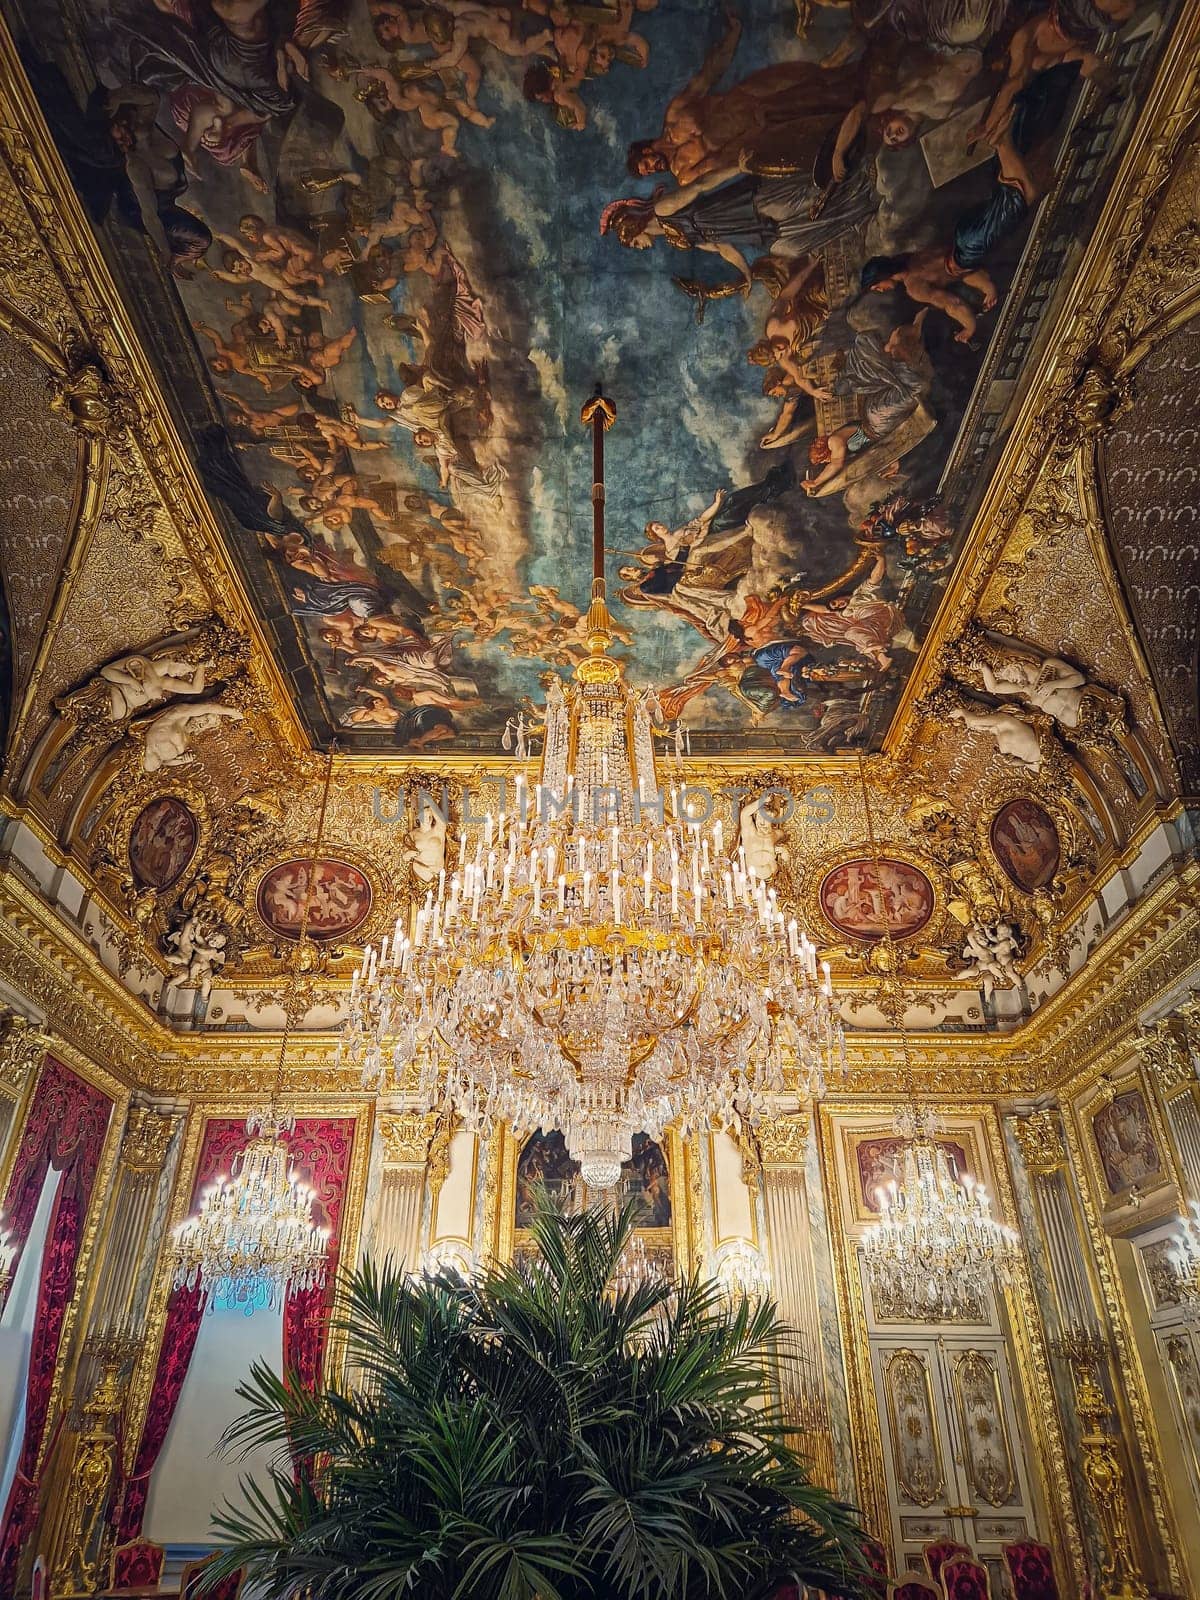 Beautiful decorated Napoleon apartments at Louvre palace. Royal family rooms with cardinal red curtains, golden ornate walls, paintings and crystal chandeliers suspended from ceiling by psychoshadow